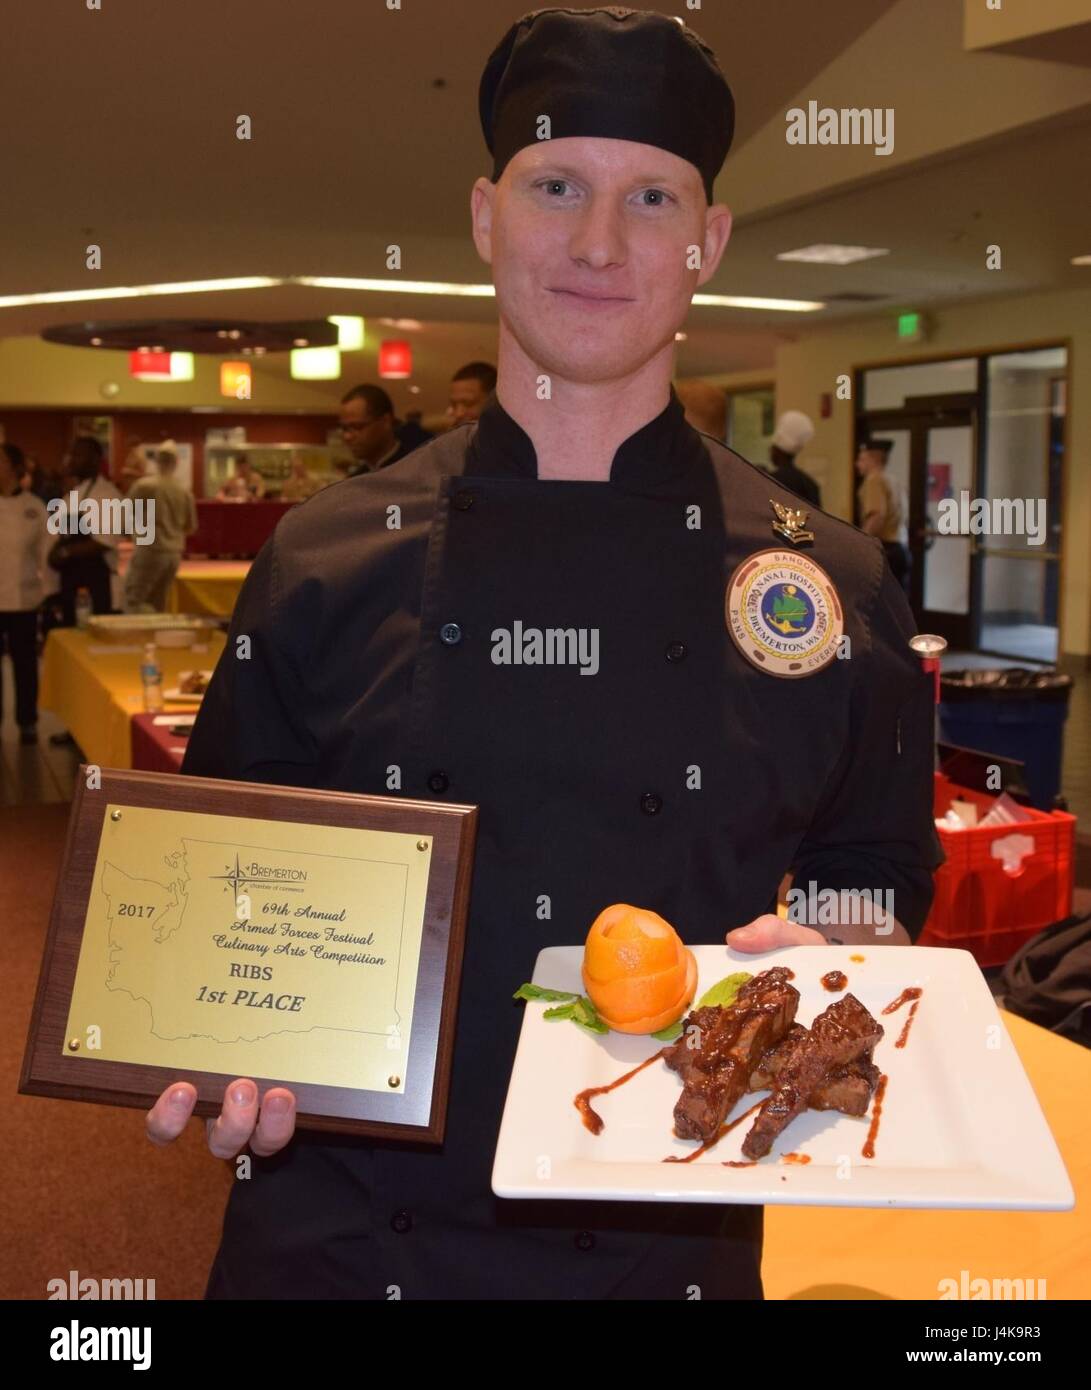 A handful of excellence...the 2017 69th Annual Armed Force Festival’s Culinary Arts Competition winner in the highly-contested 'Ribs' category was awarded to Culinary Specialist 2nd Class Christopher Wojcik of Naval Hospital Bremerton (Official Navy photo by Douglas H Stutz, Naval Hospital Bremerton Public Affairs). Stock Photo